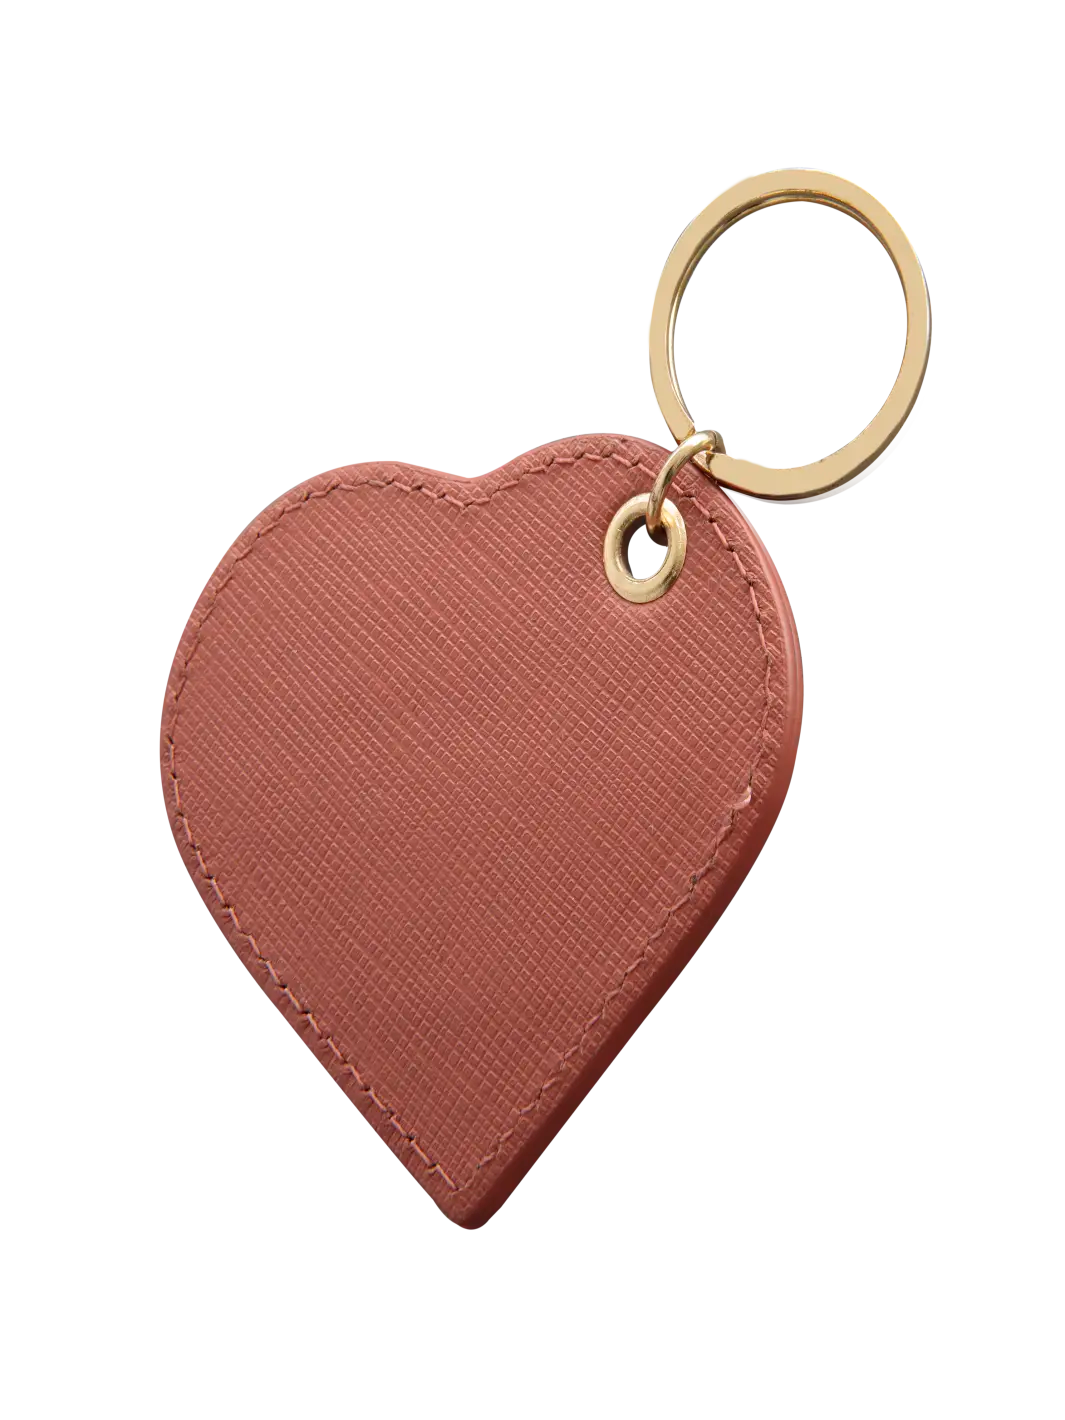 MODE. Heart Key ring - Outlet Rusty Rose Key rings